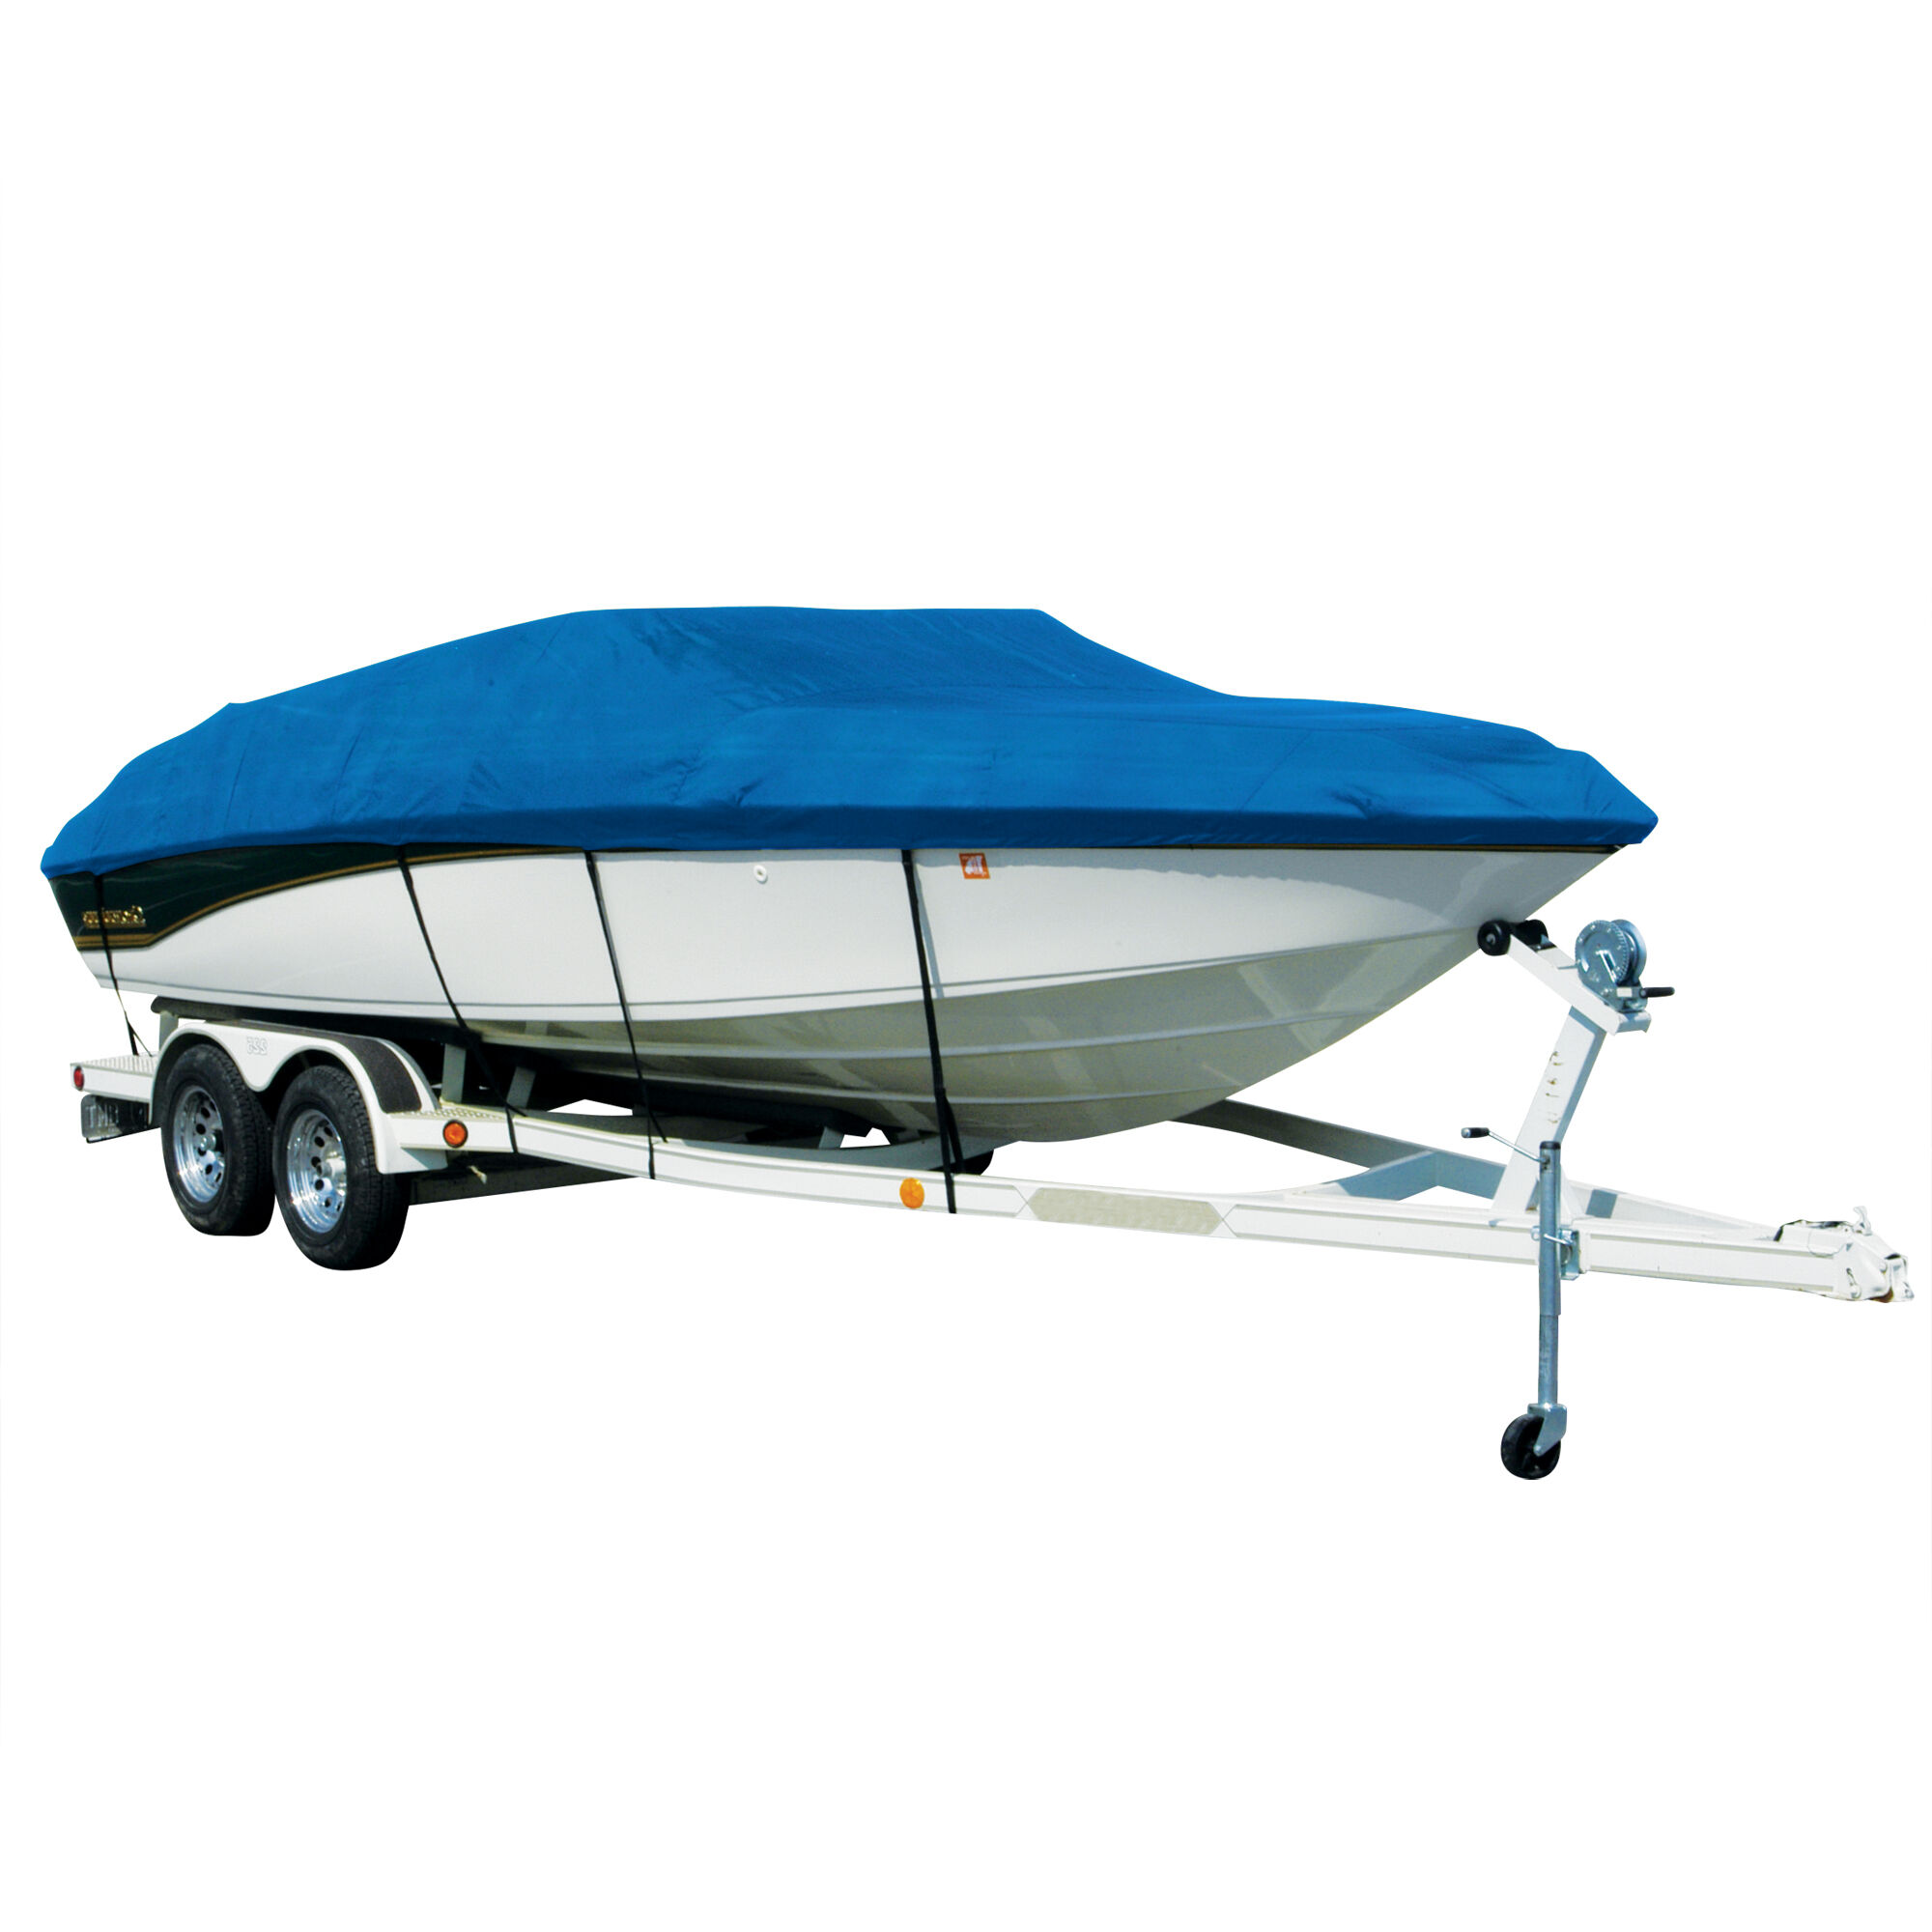 Covermate Sharkskin Plus Exact-Fit Cover for Campion Chase 580 Zri/Zricd Chase 580 Zri/Zricd I/O. Blue Boat Cover Polyester